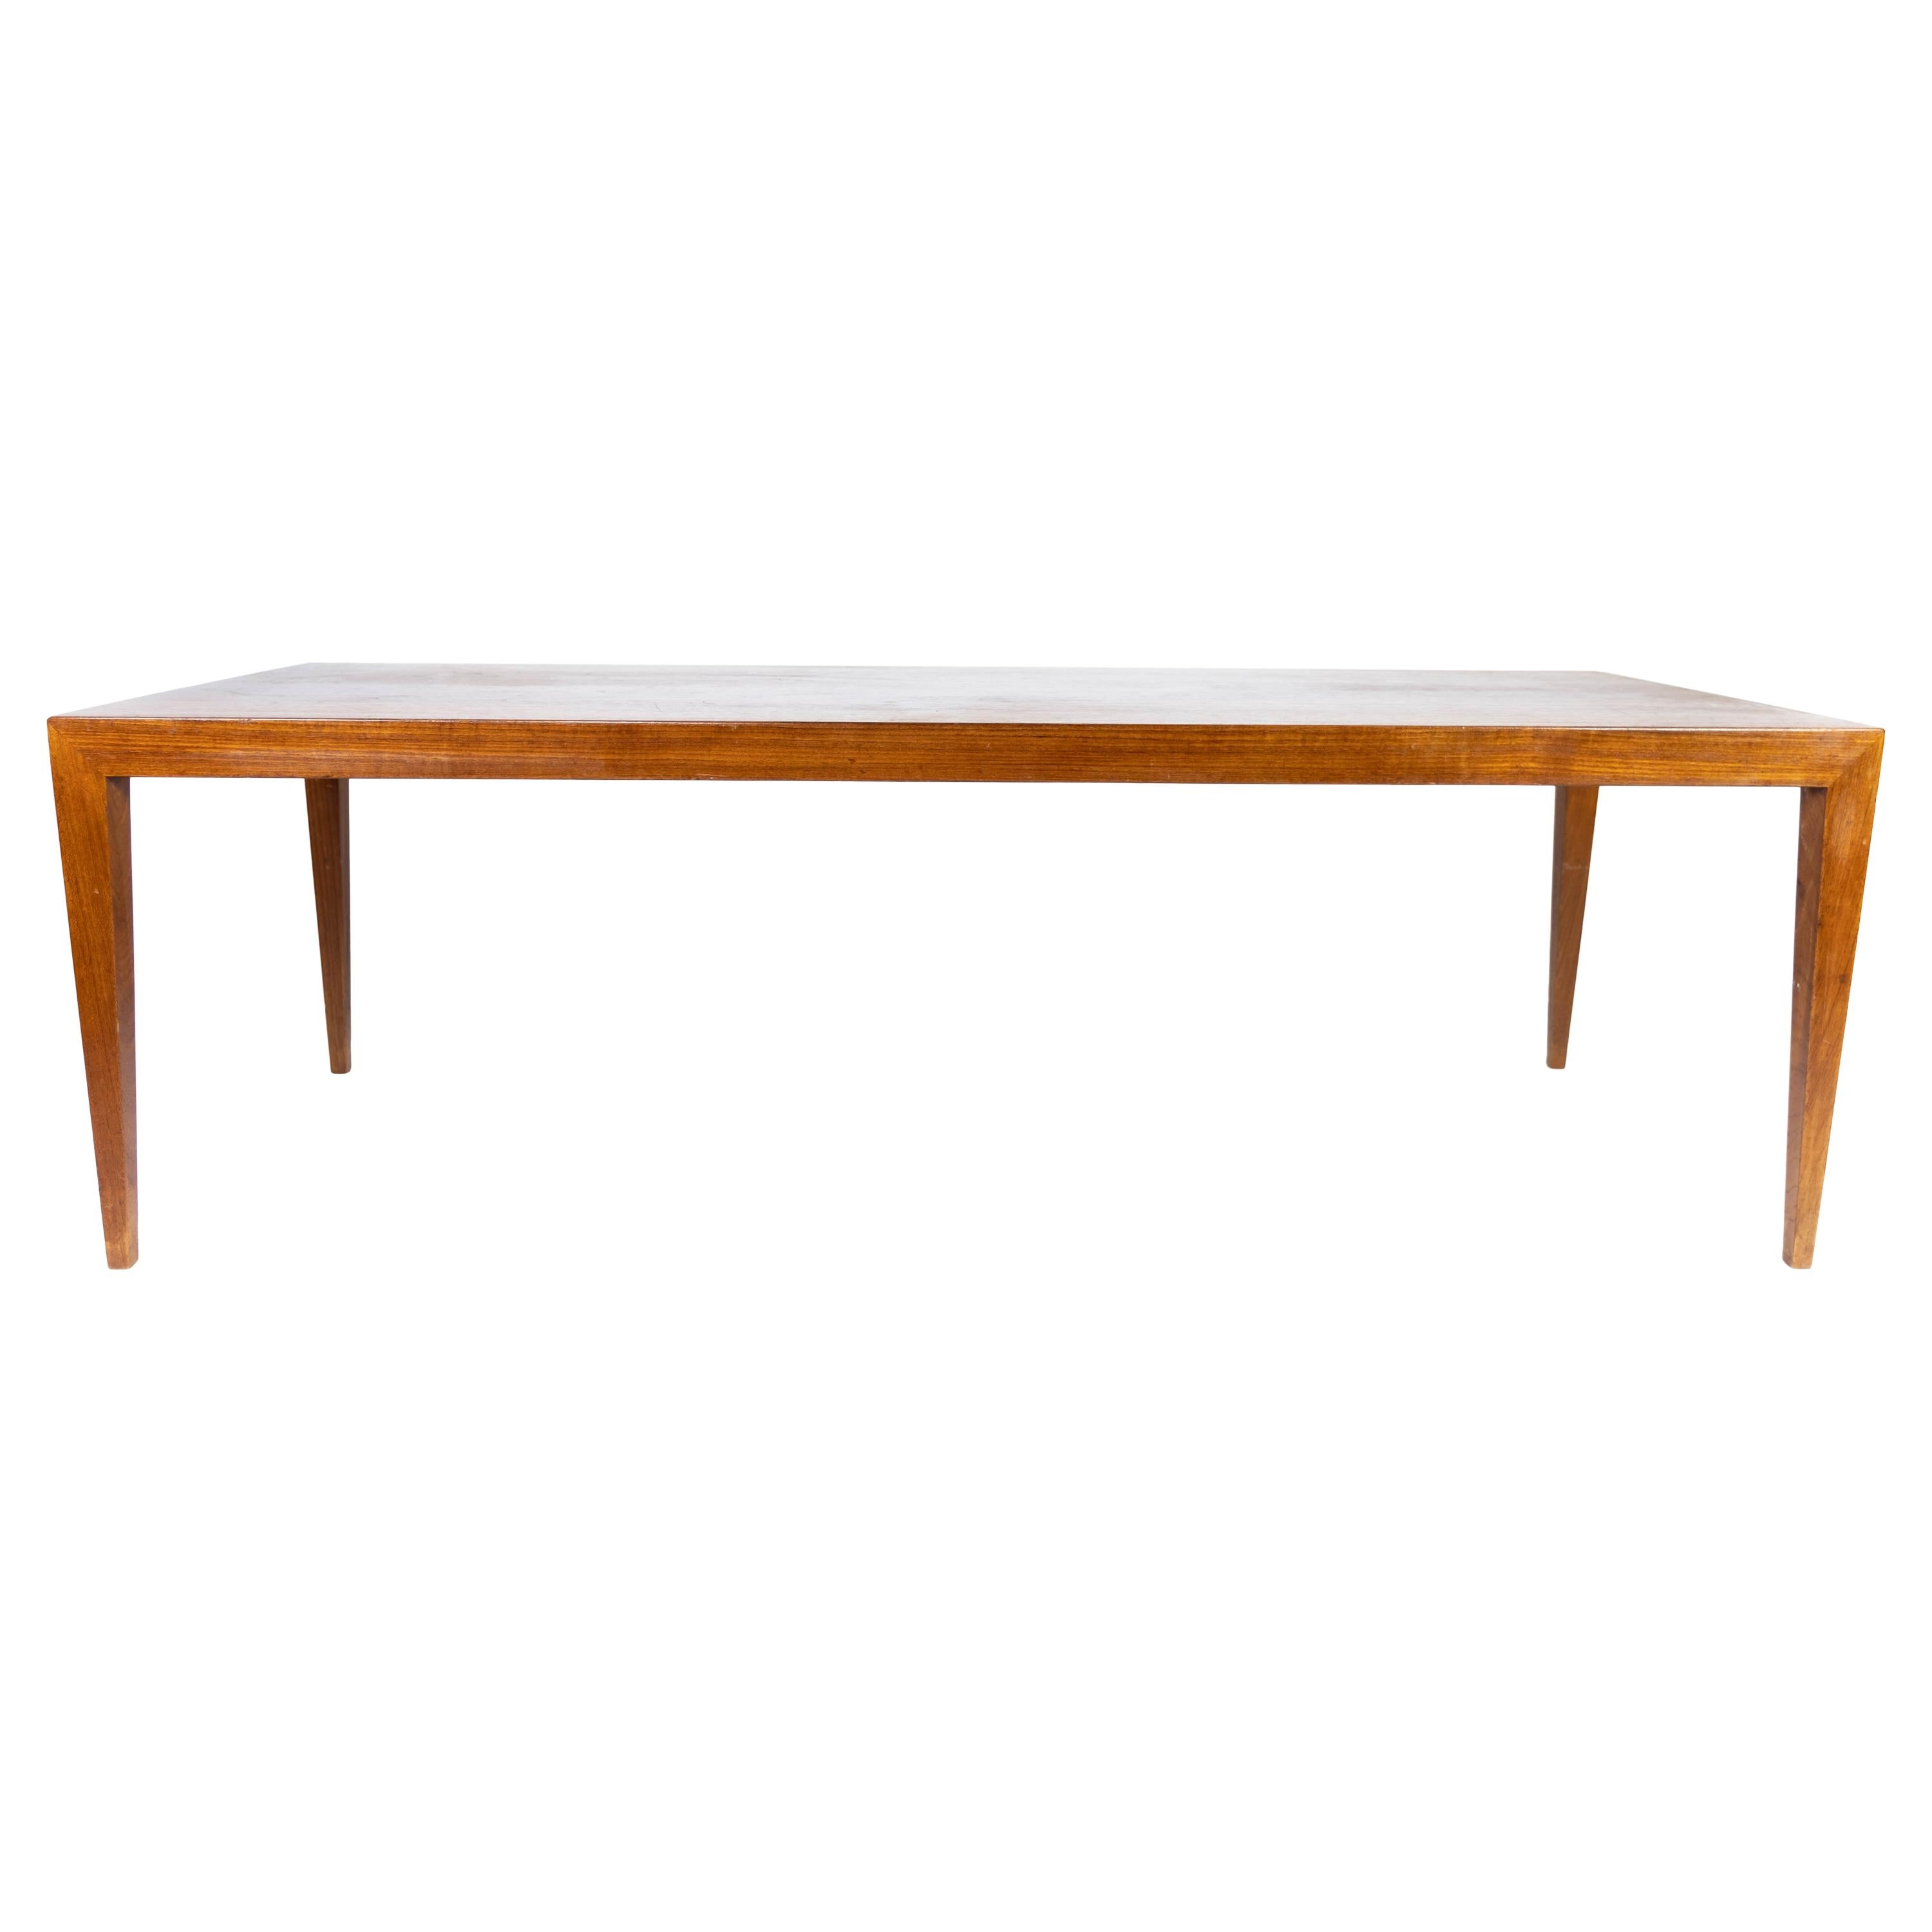 Coffee Table in Teak Designed by Severin Hansen and Haslev Furniture, 1960s